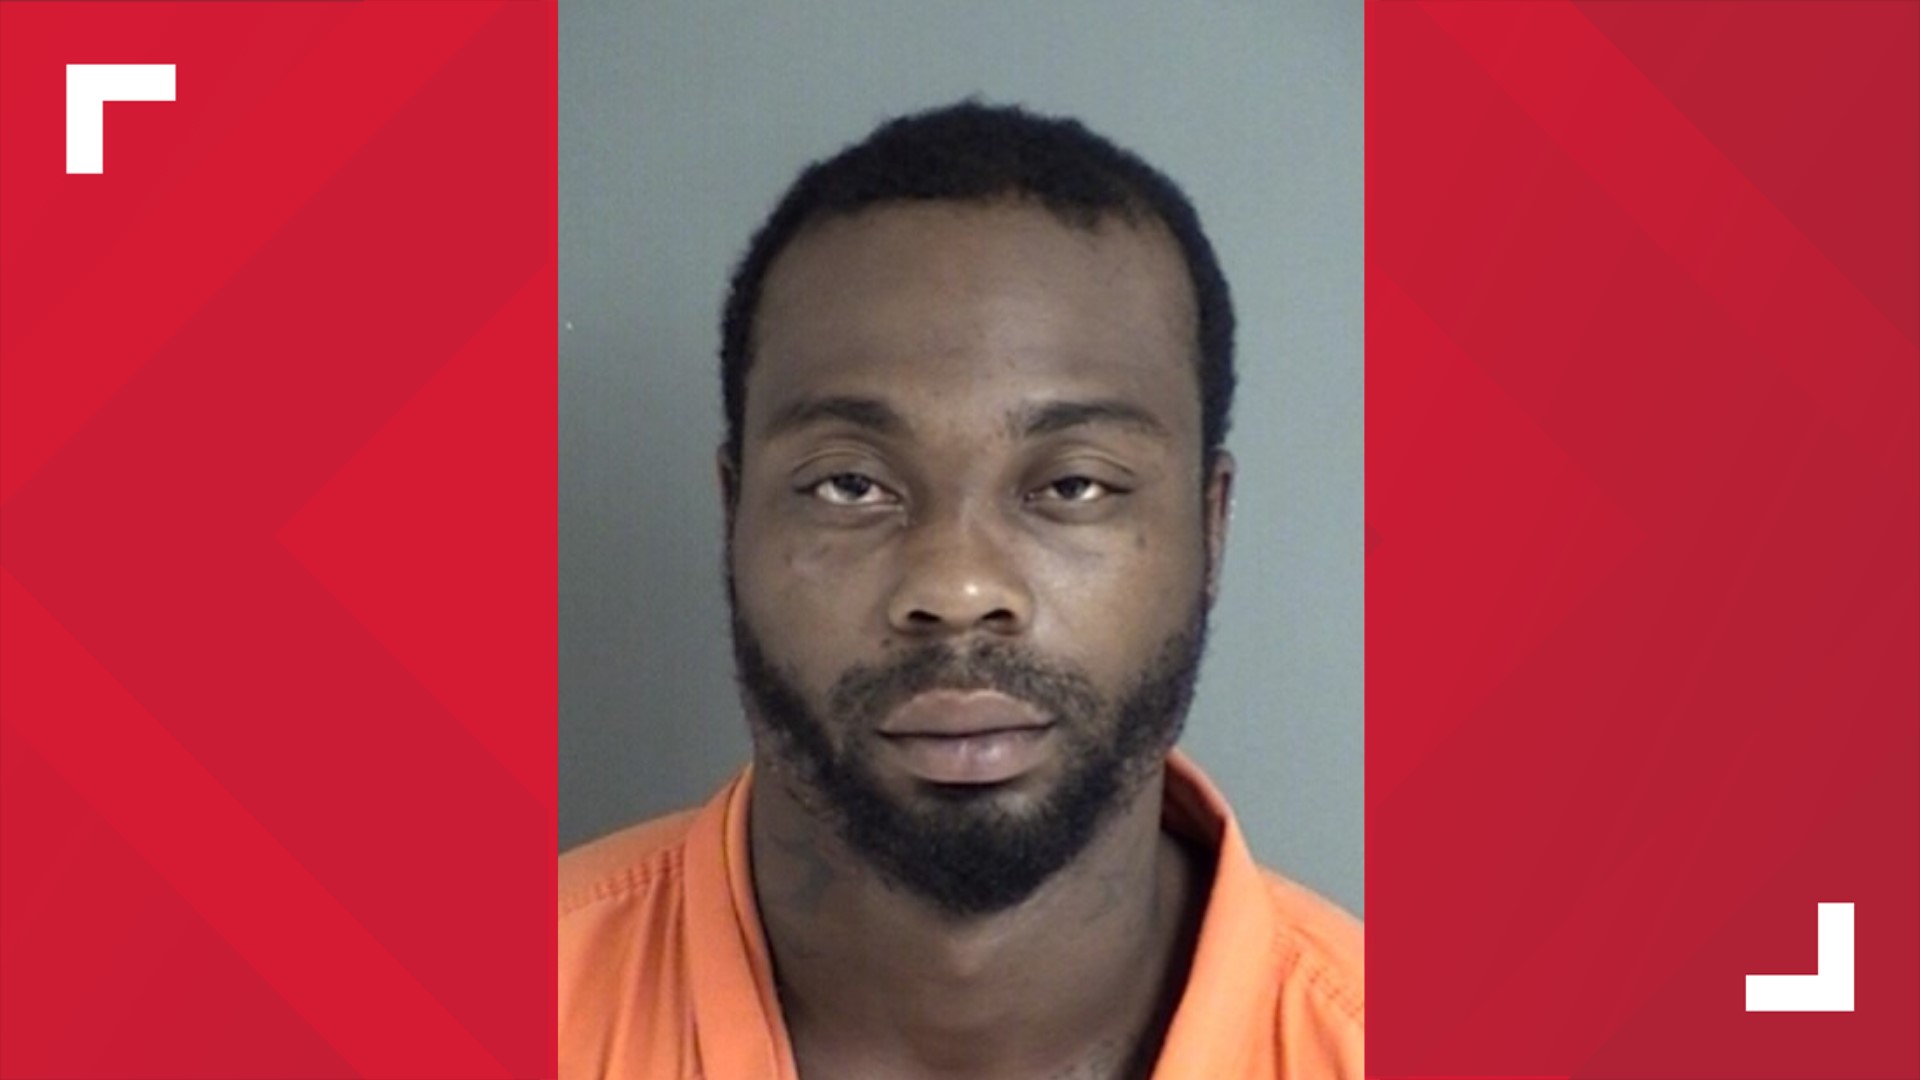 Lufkin man arrested for kidnapping, aggravated sexual assault, leading